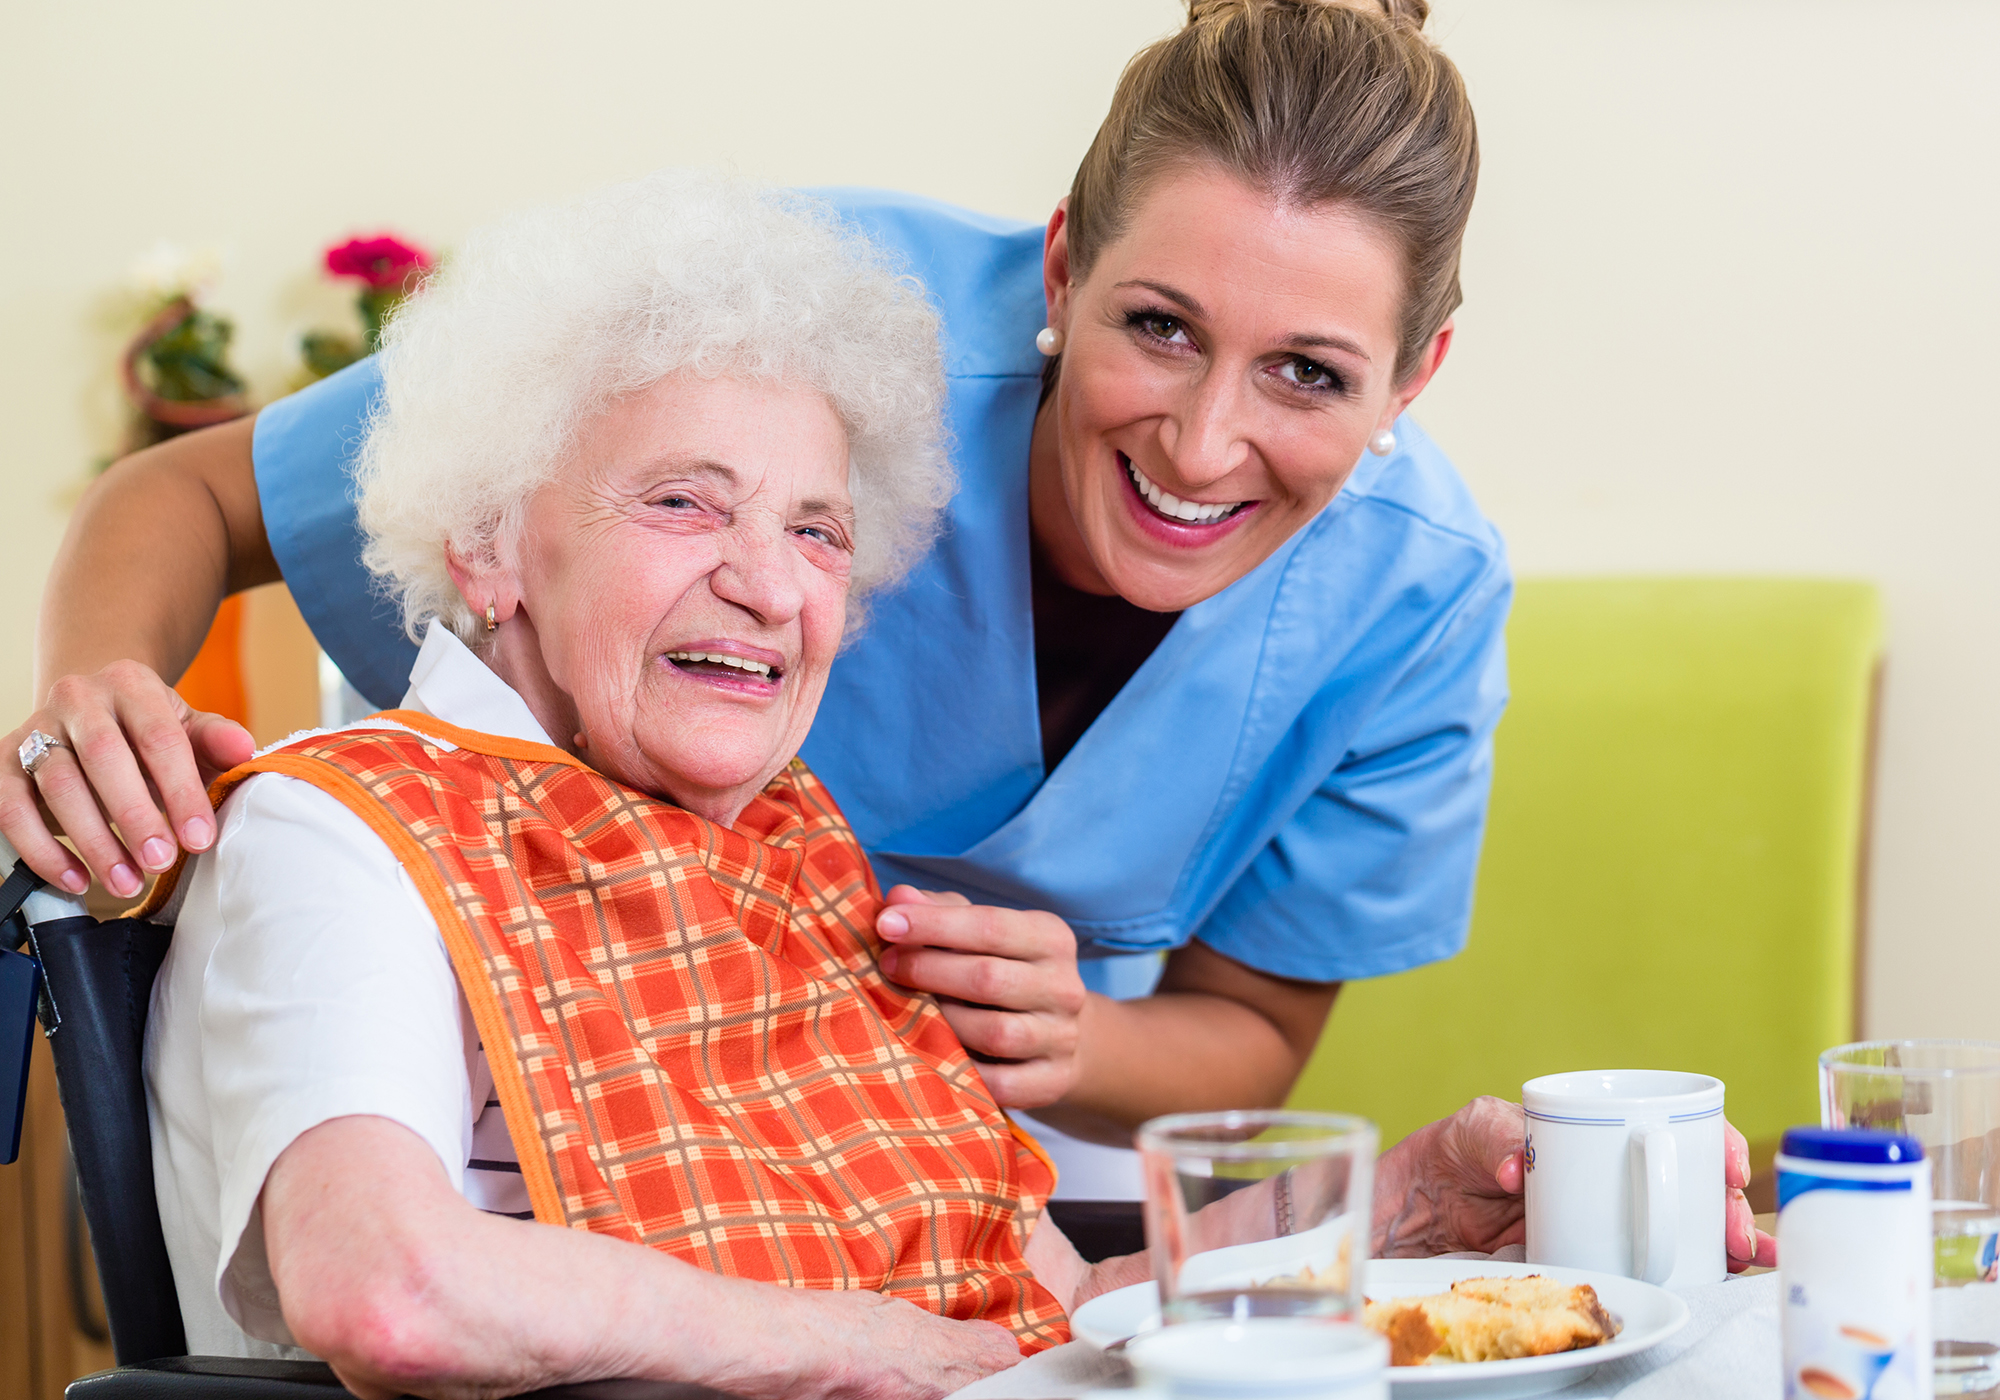 Does Your Elderly Parent Need On Going In Home Care In The Dallas – Fort Worth Area? What To Look For To Avoid A Crisis